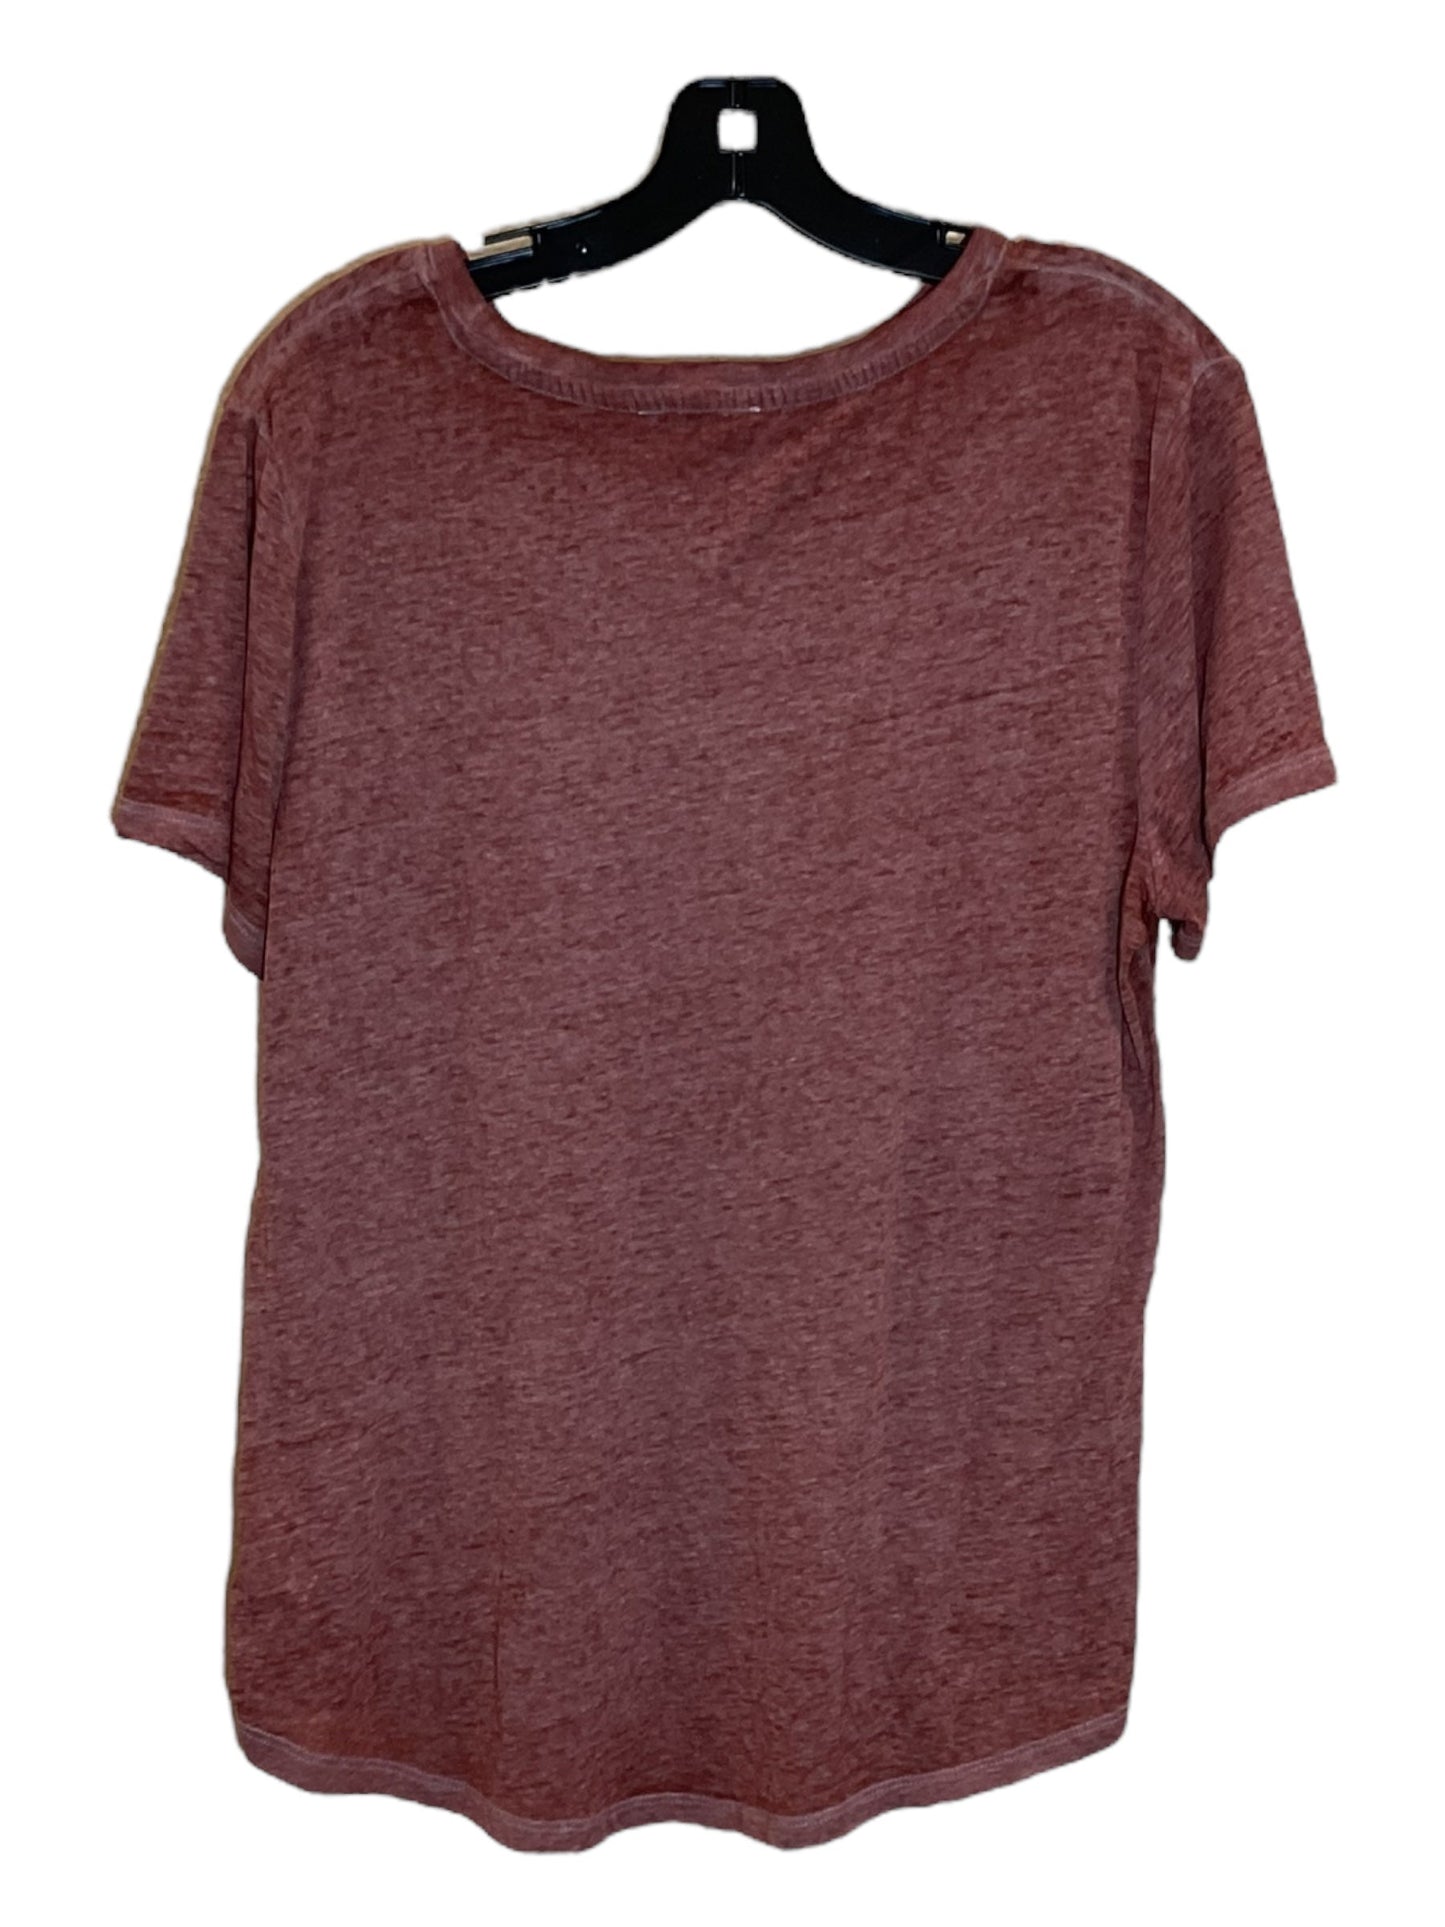 Brown Top Short Sleeve Maurices, Size L